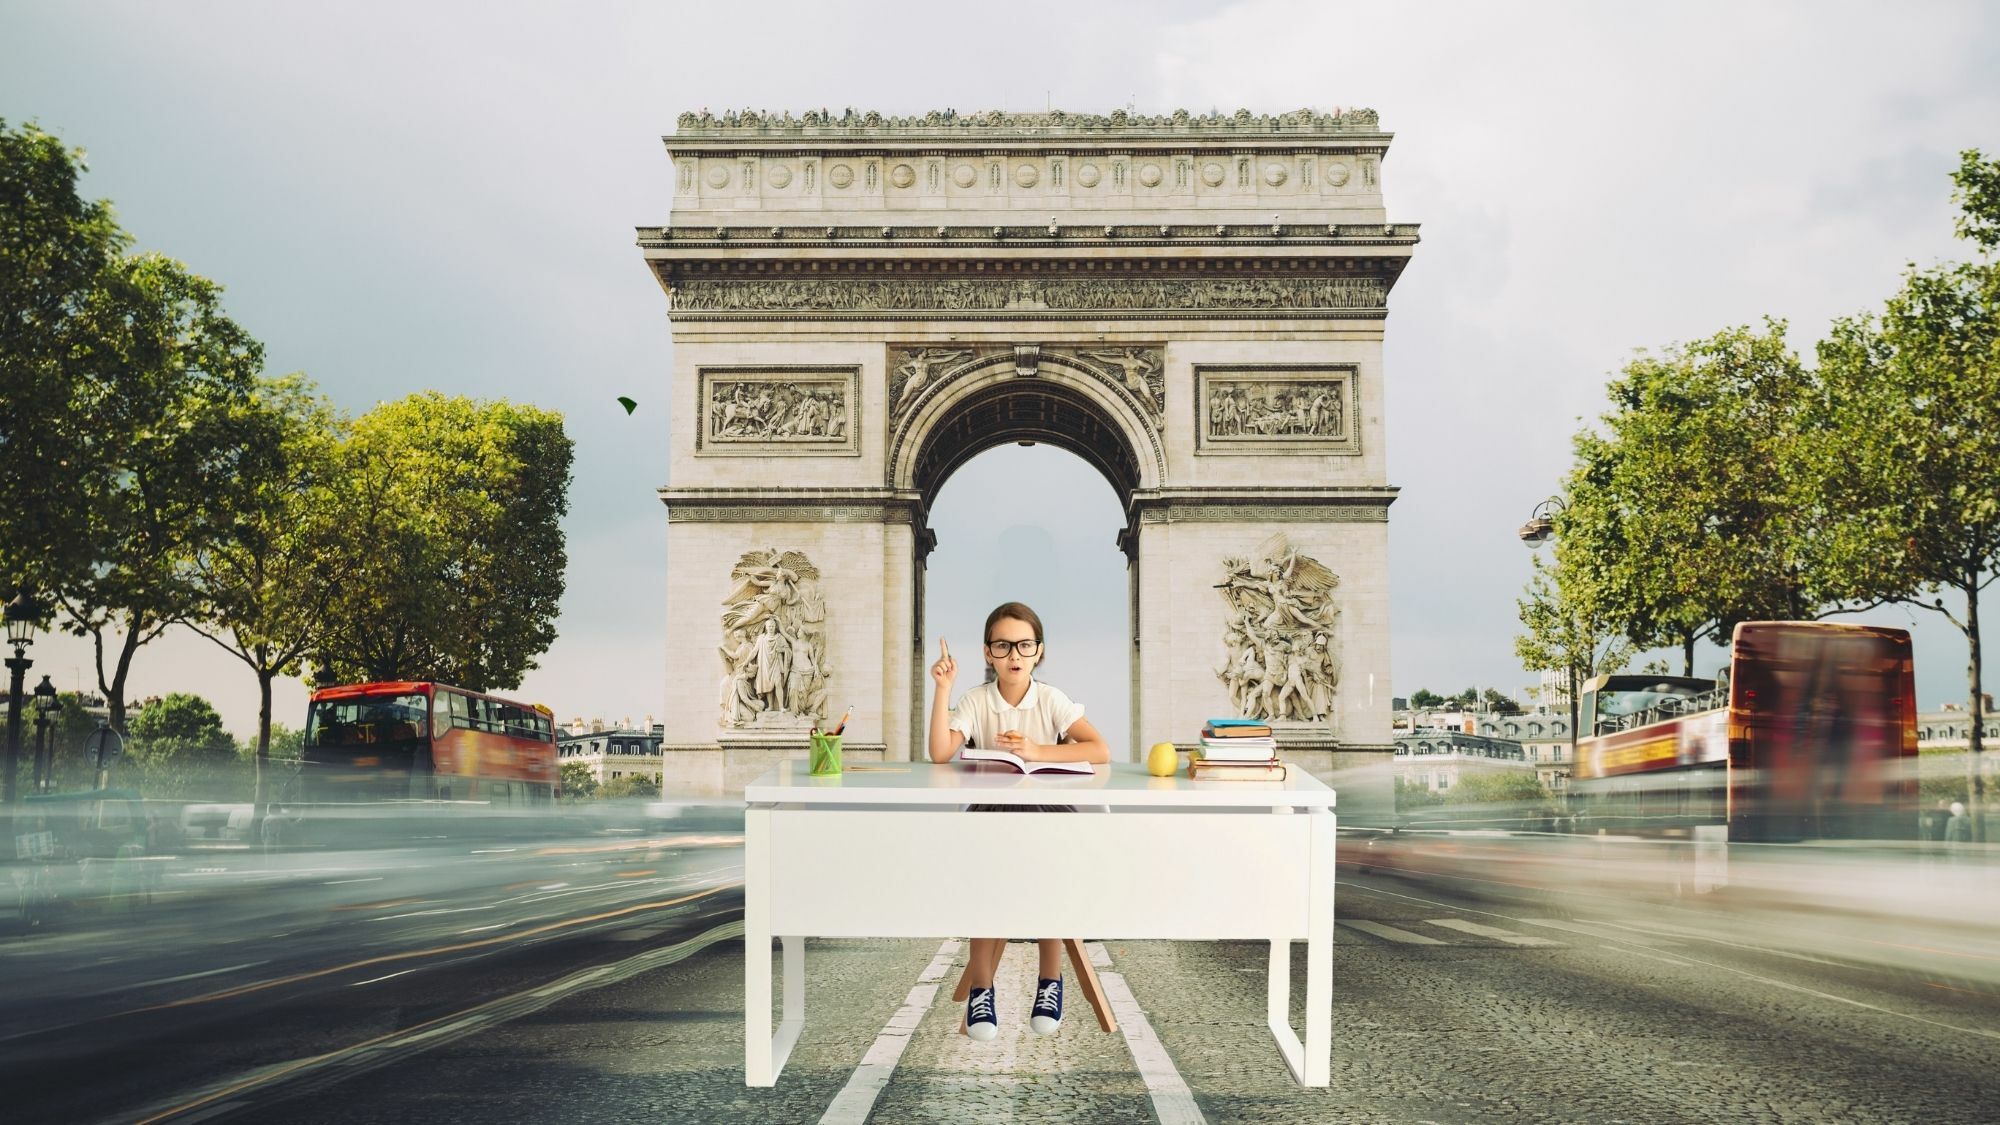 The biggest dictation in the world will take place on the Champs-Élysées in  June!